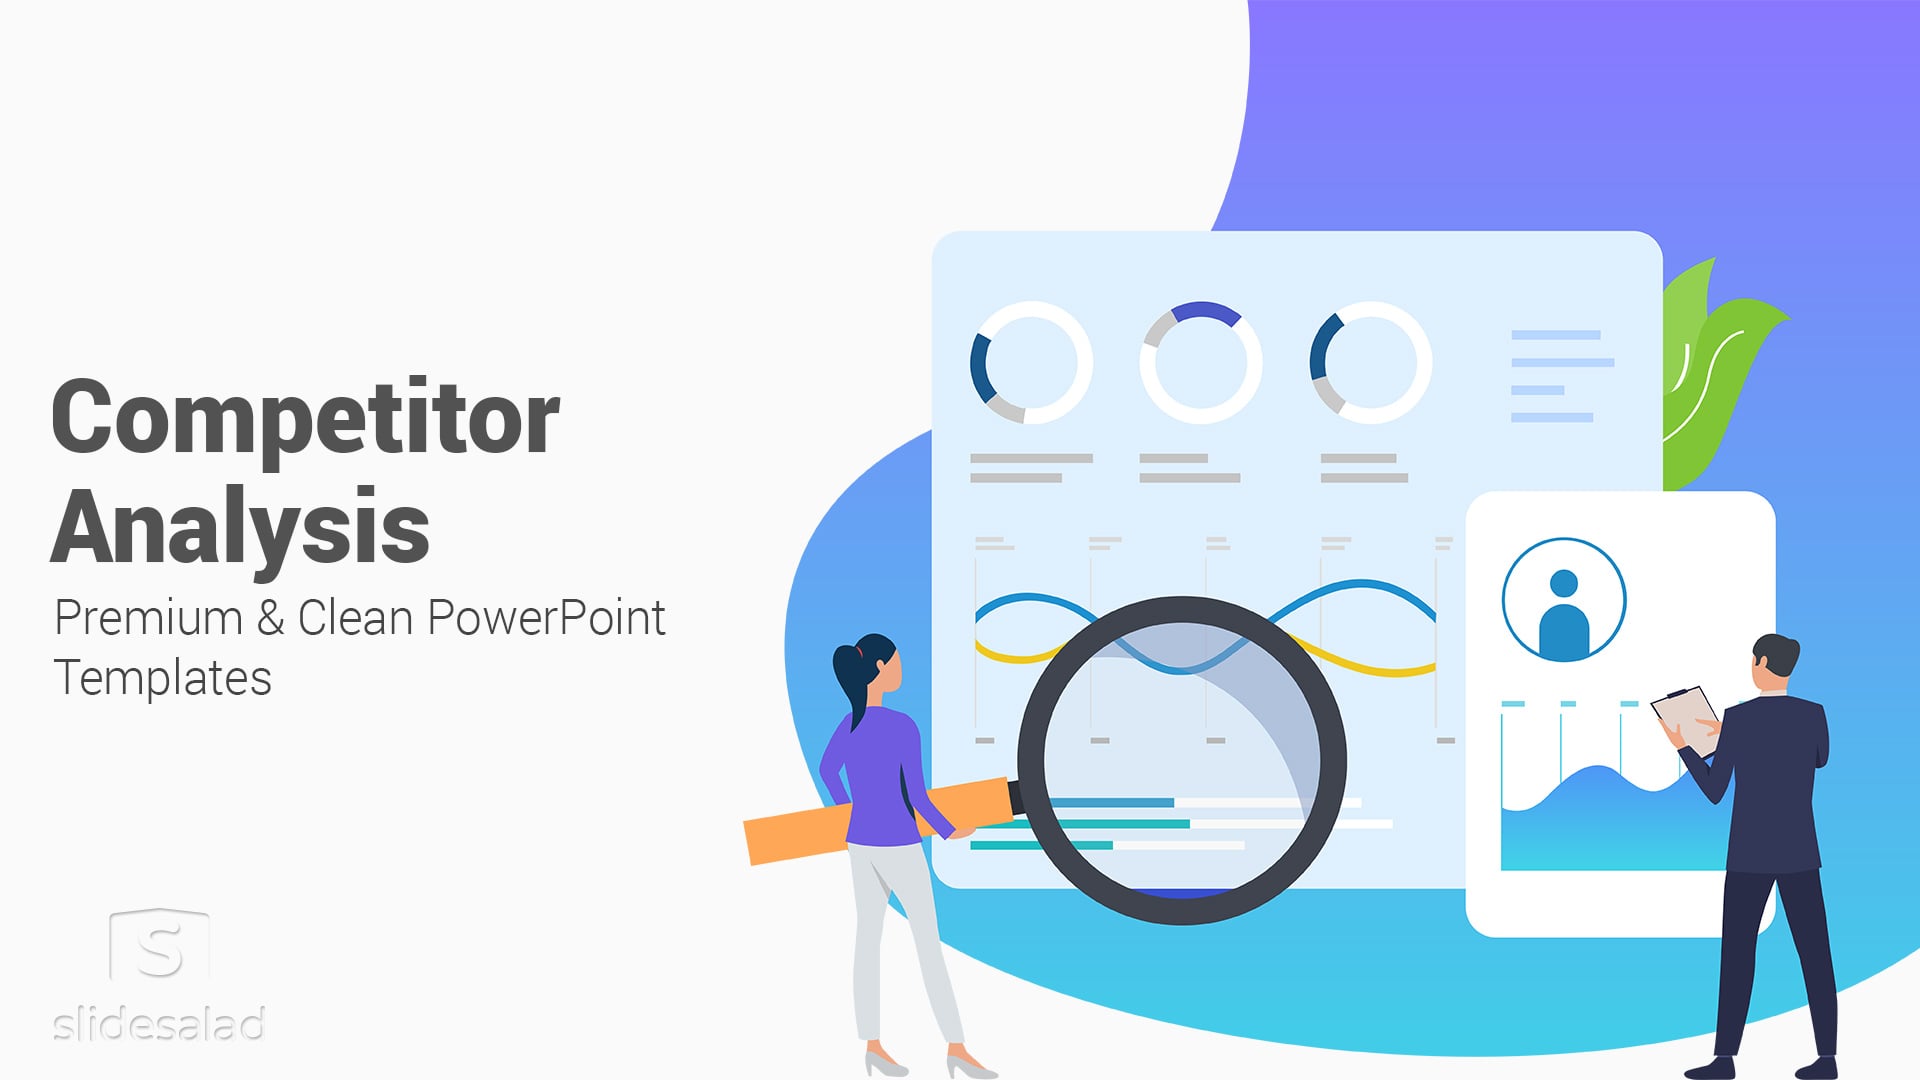 Competitor Analysis PowerPoint Template - Market Competition PPT Design Themes and Layouts